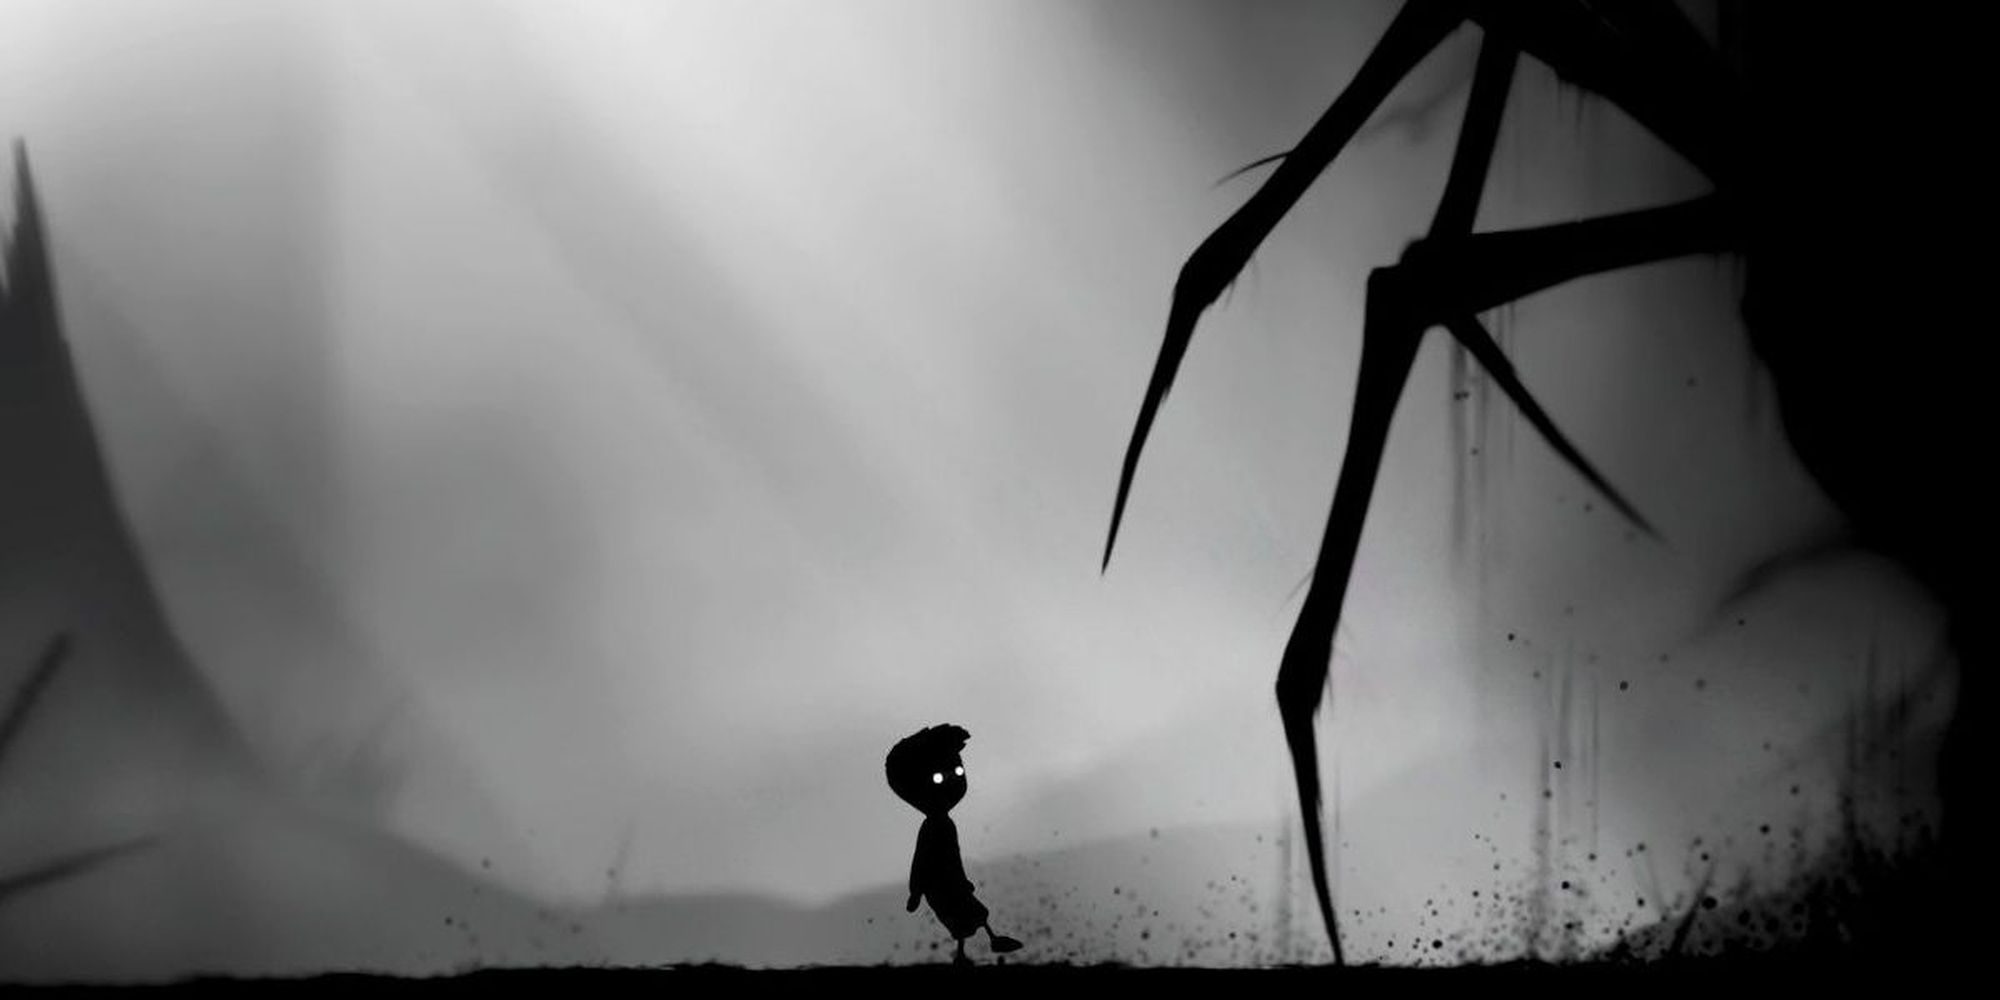 Limbo - The Silhouette Spider About To Attack The Boy